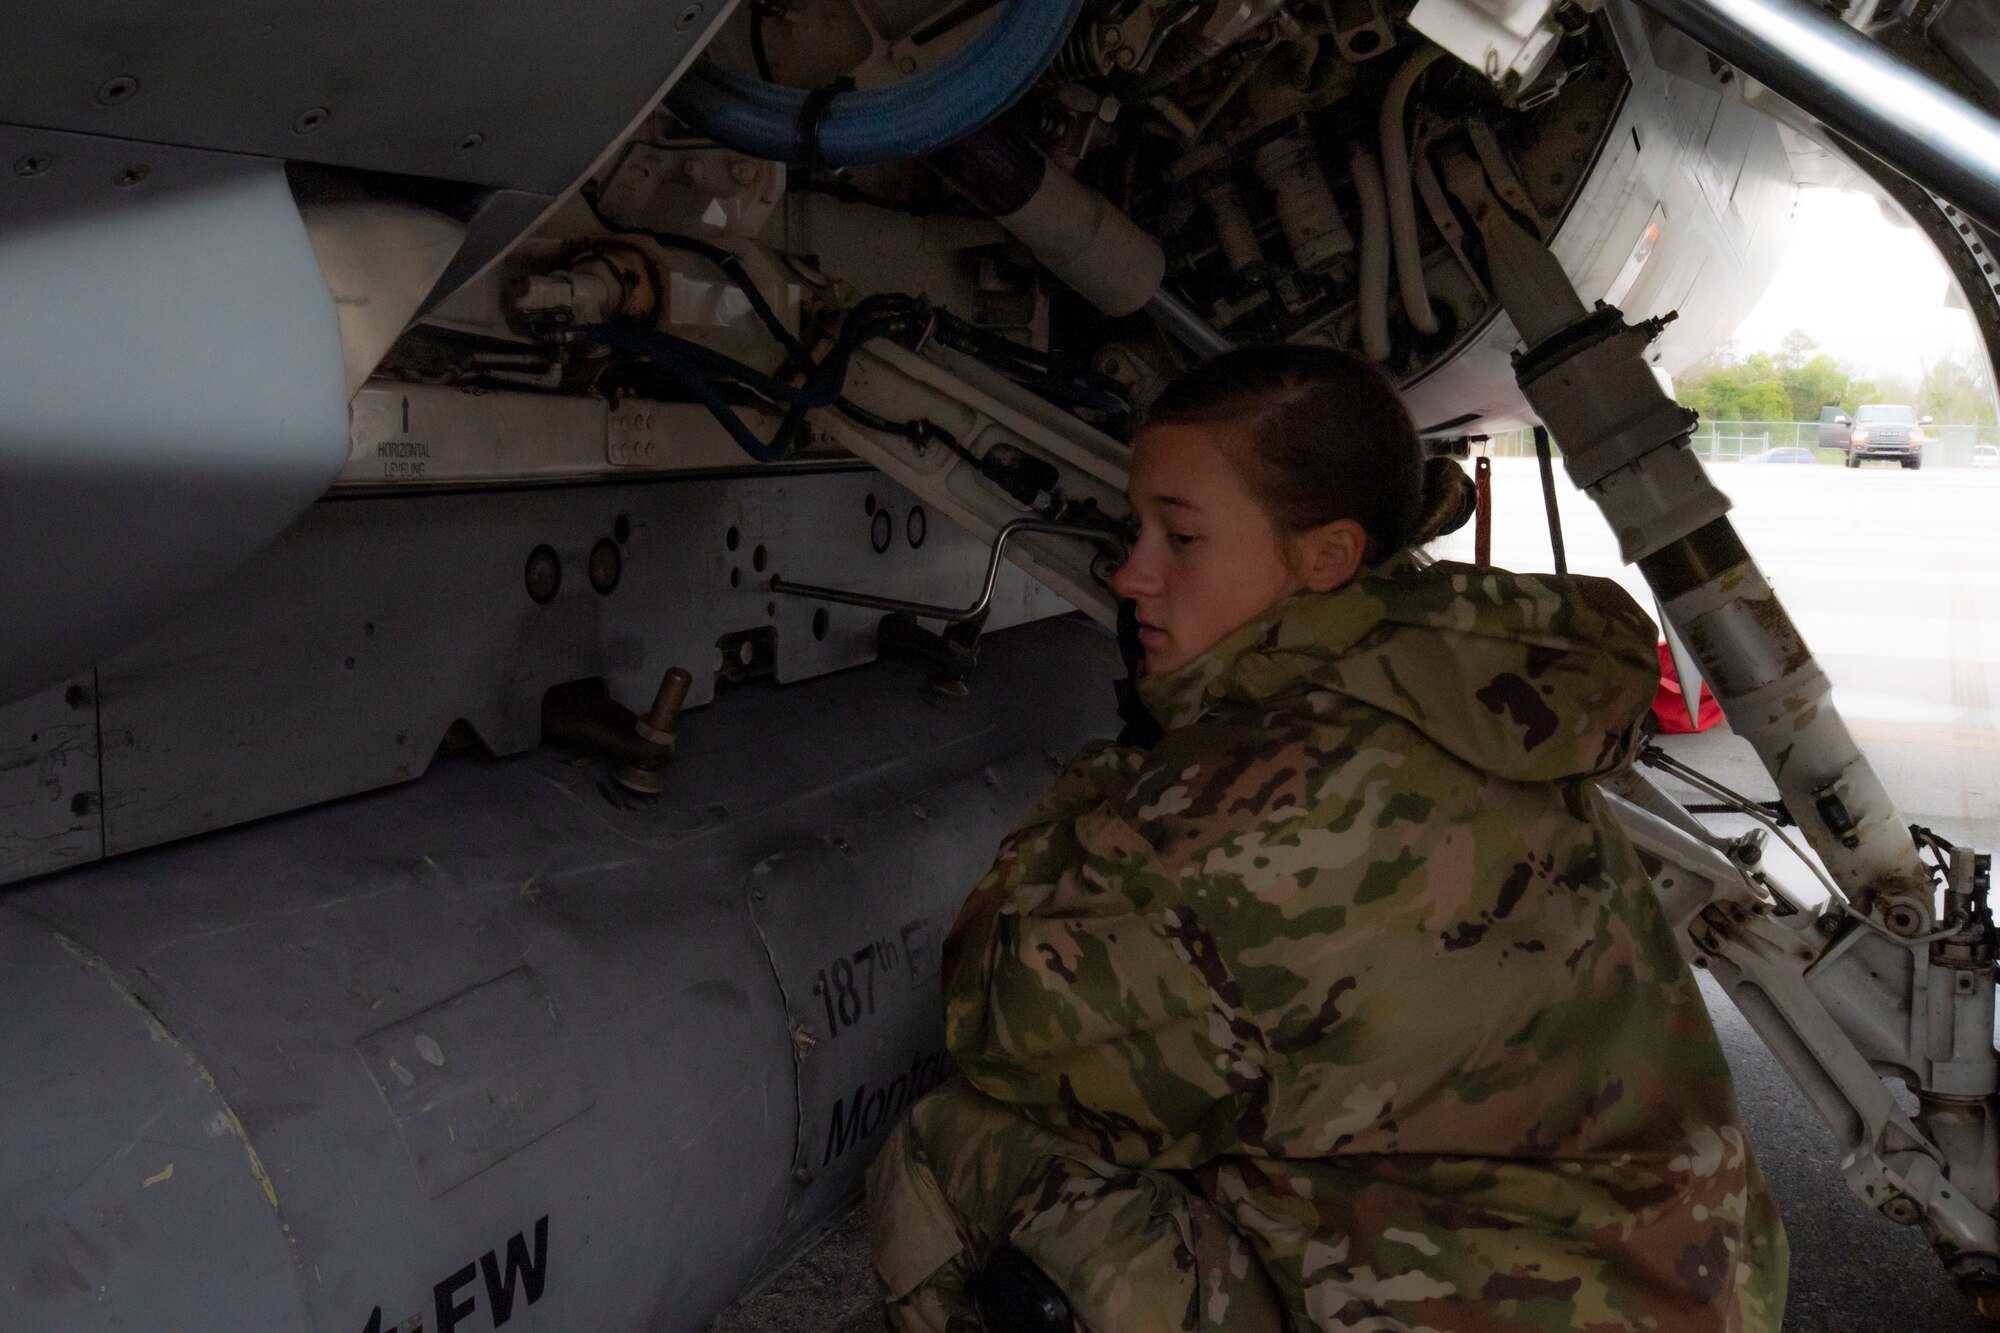 A crew chief with the 187th Fighter Wing works on an F-16 as part of a rapid deployment exercise in Dothan, Ala., March 3, 2021.